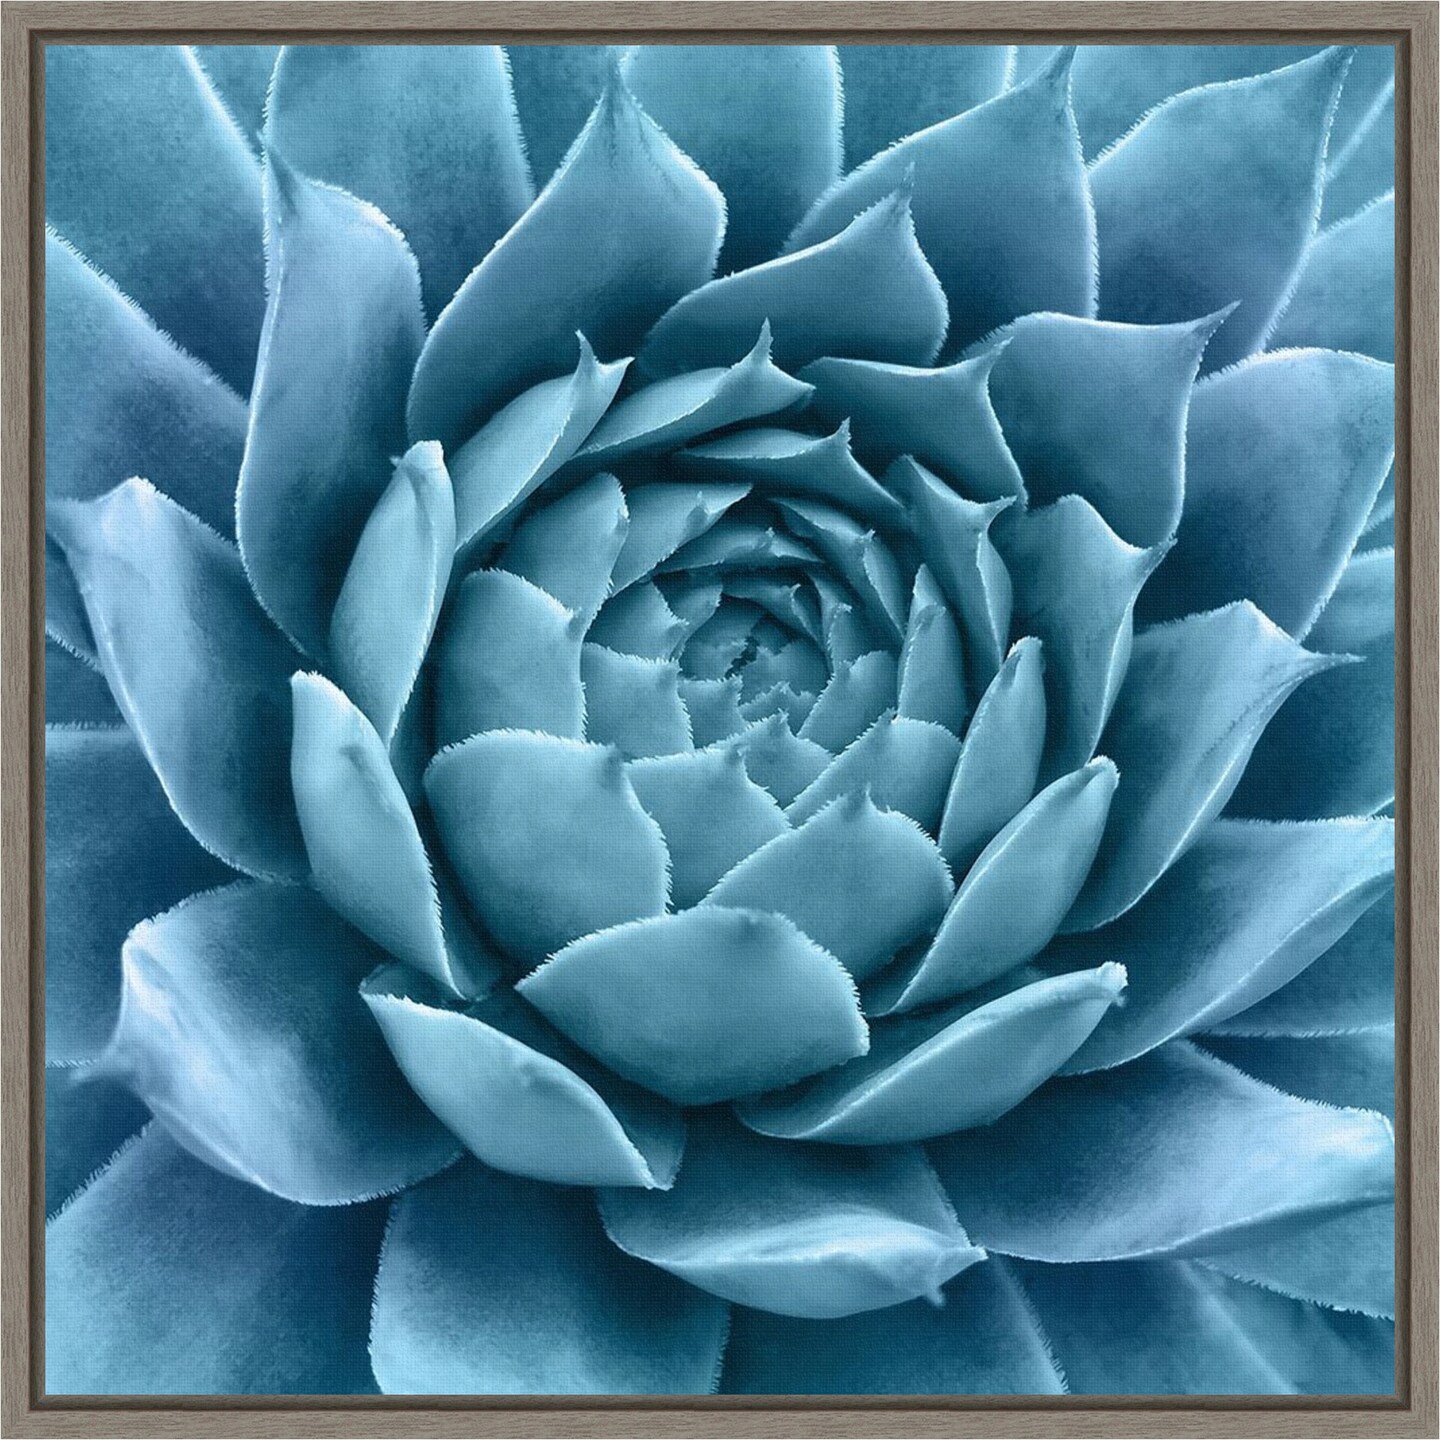 Silvery Blue Agave by Jan Bell 16-in. W x 16-in. H. Canvas Wall Art Print Framed in Grey